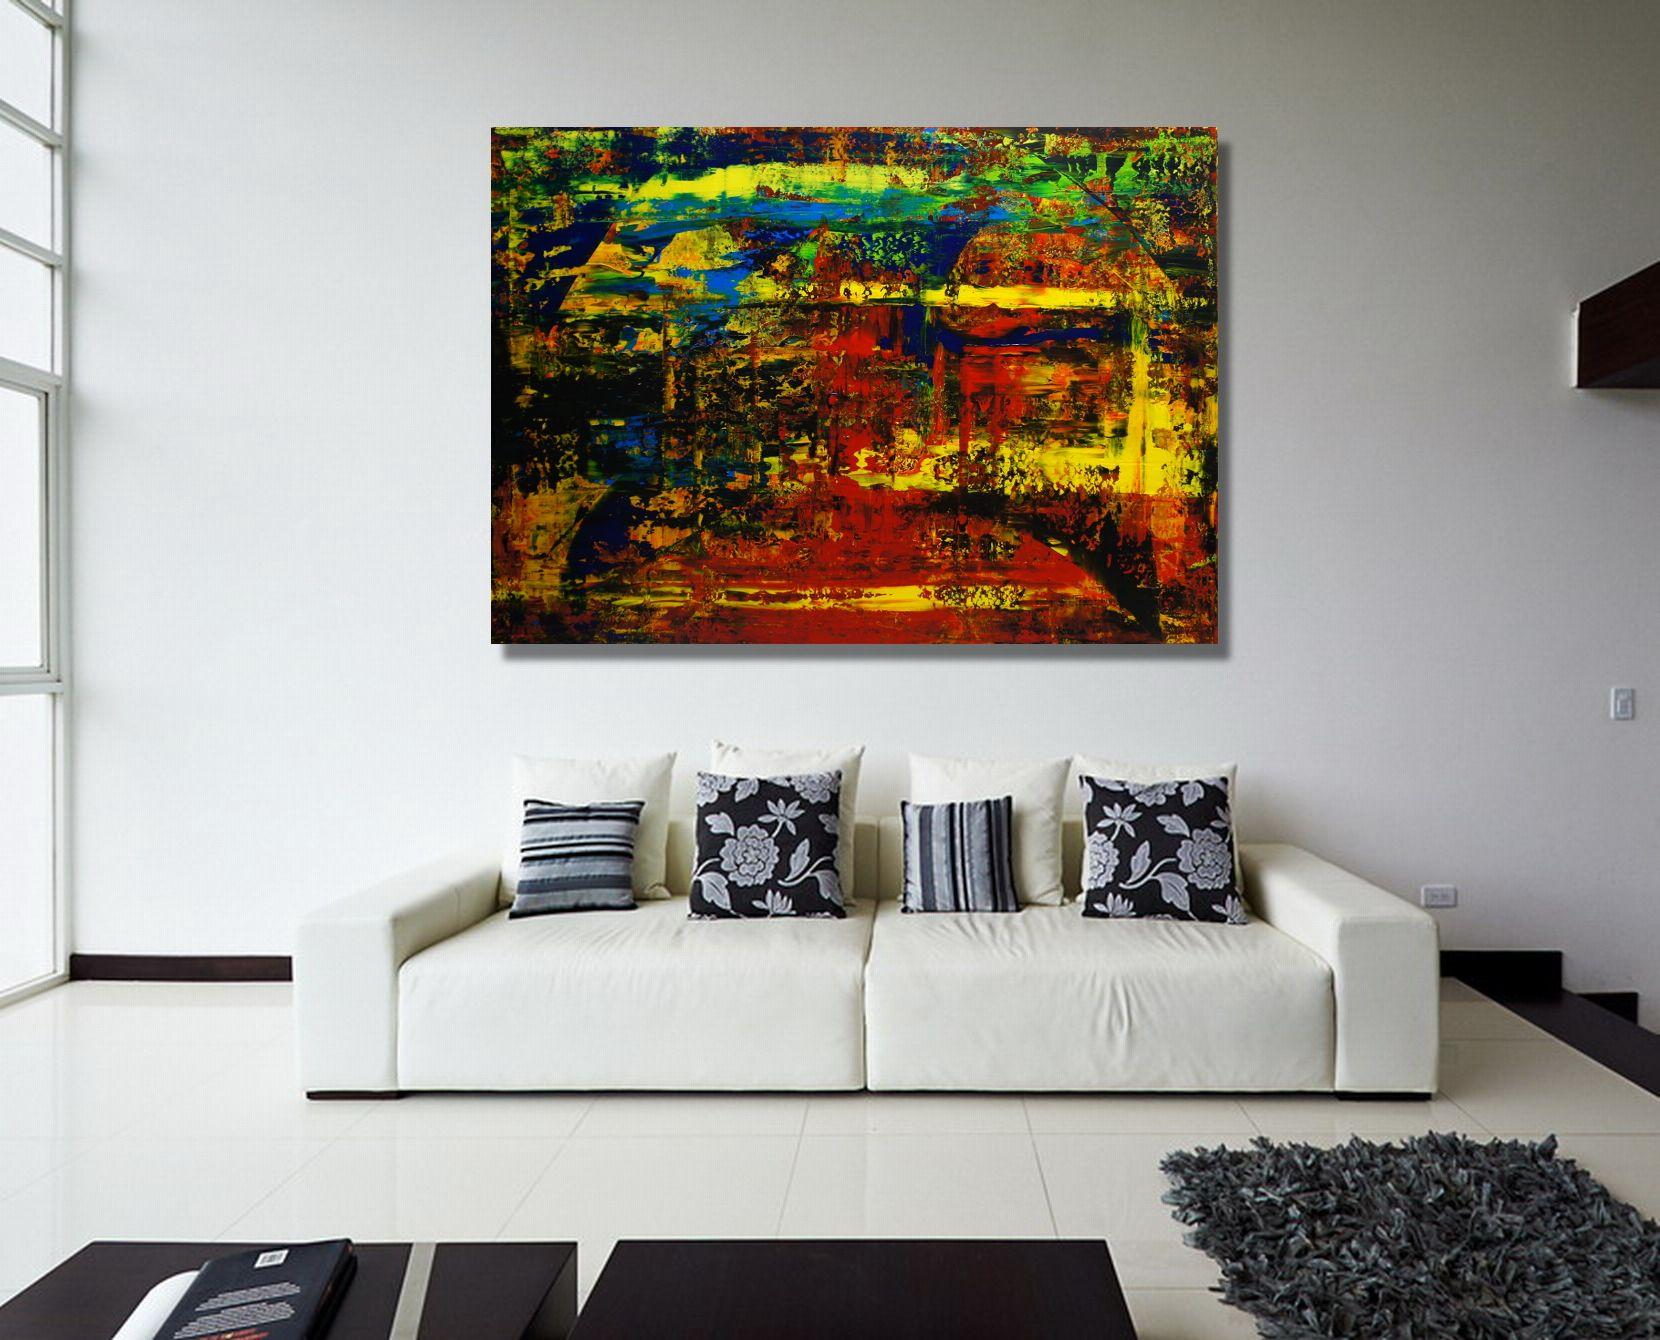 This large pallet-knife painting in acrylics comes with multiple layers of paint. In this one I see coloful robes swirling through majestic ballroom halls, leaving a frenzy of colorsâ€¦.    Unique original piece in quality acrylics on deep-edge